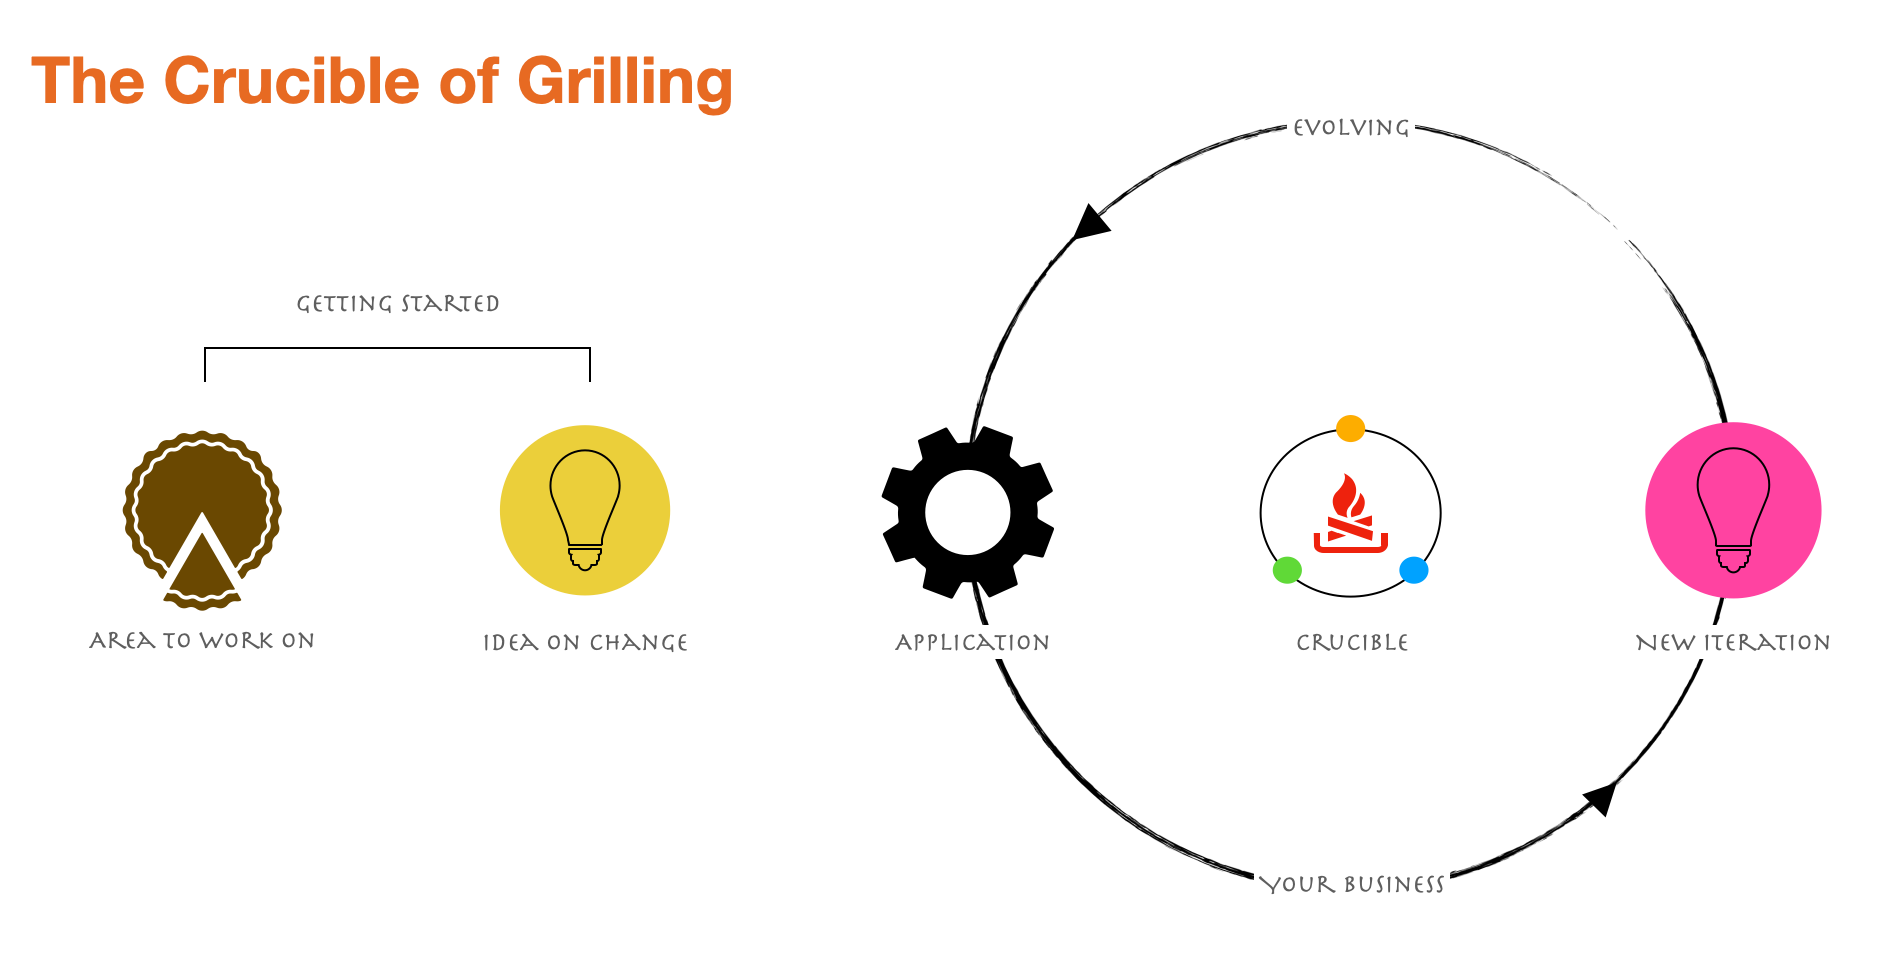 The Crucible of Rigorous Grilling